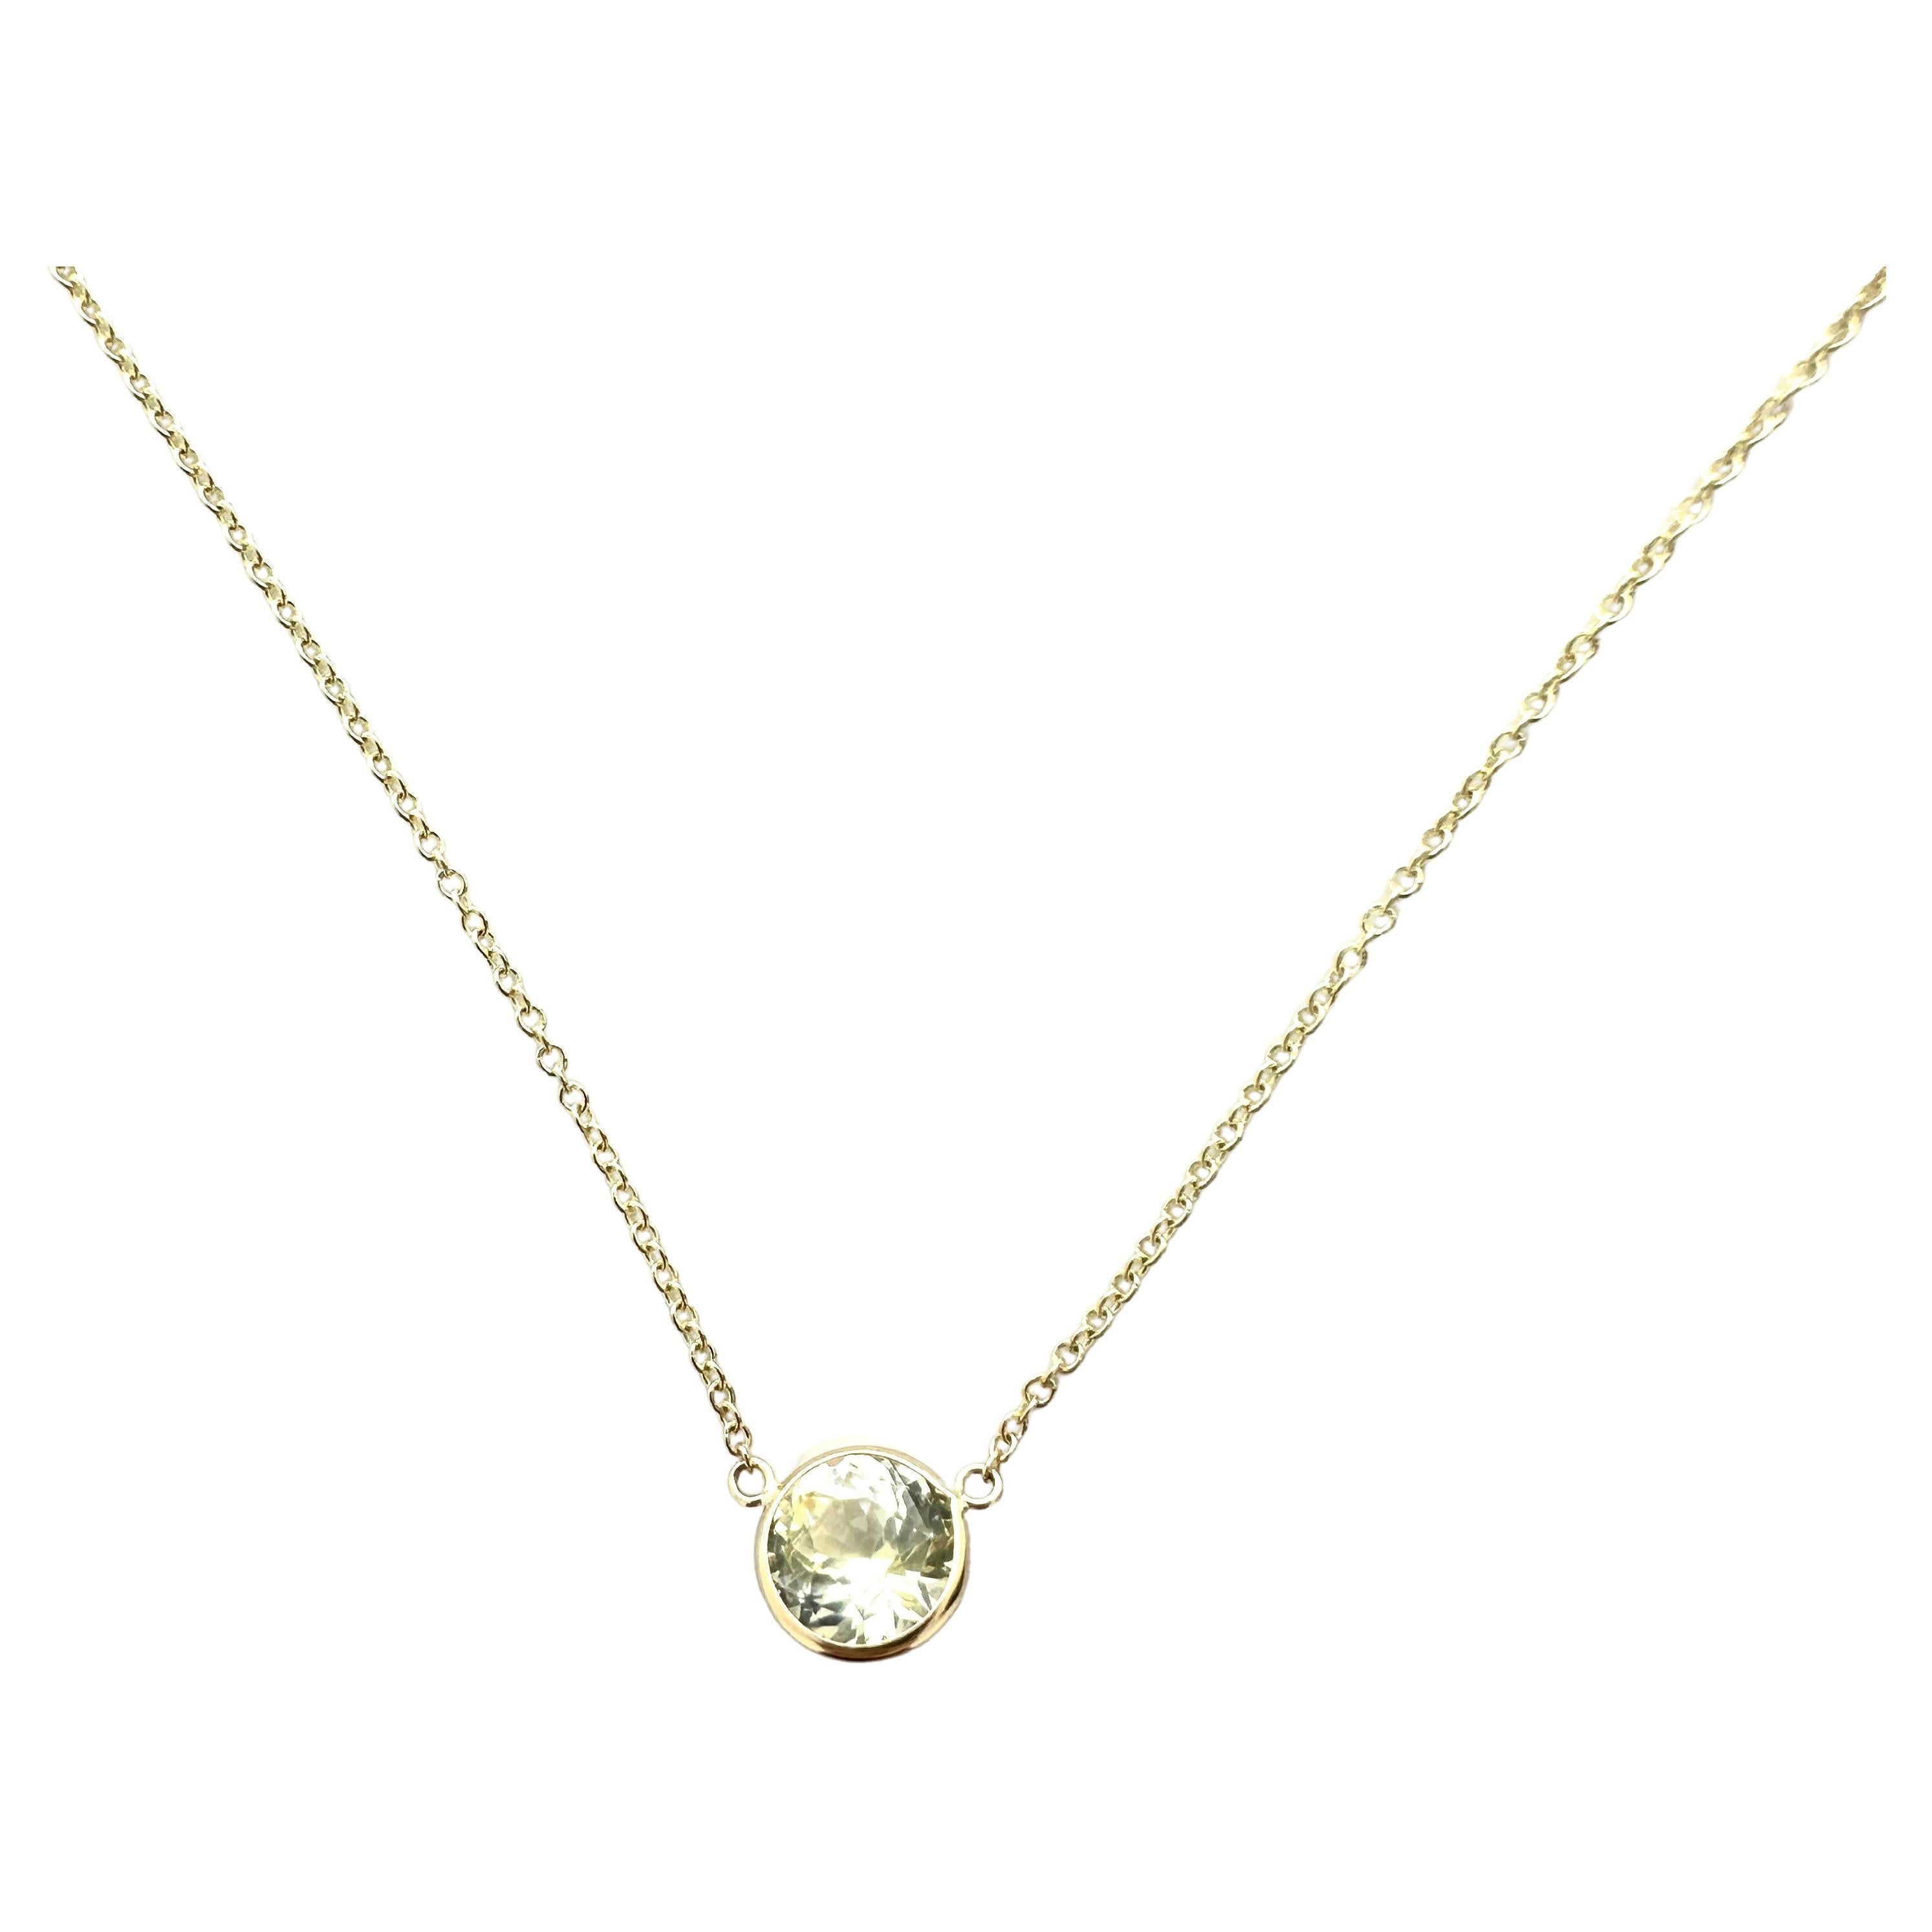 2.35 Carat Yellow Sapphire Round Certified &Fashion Necklaces In 14K Yellow Gold For Sale